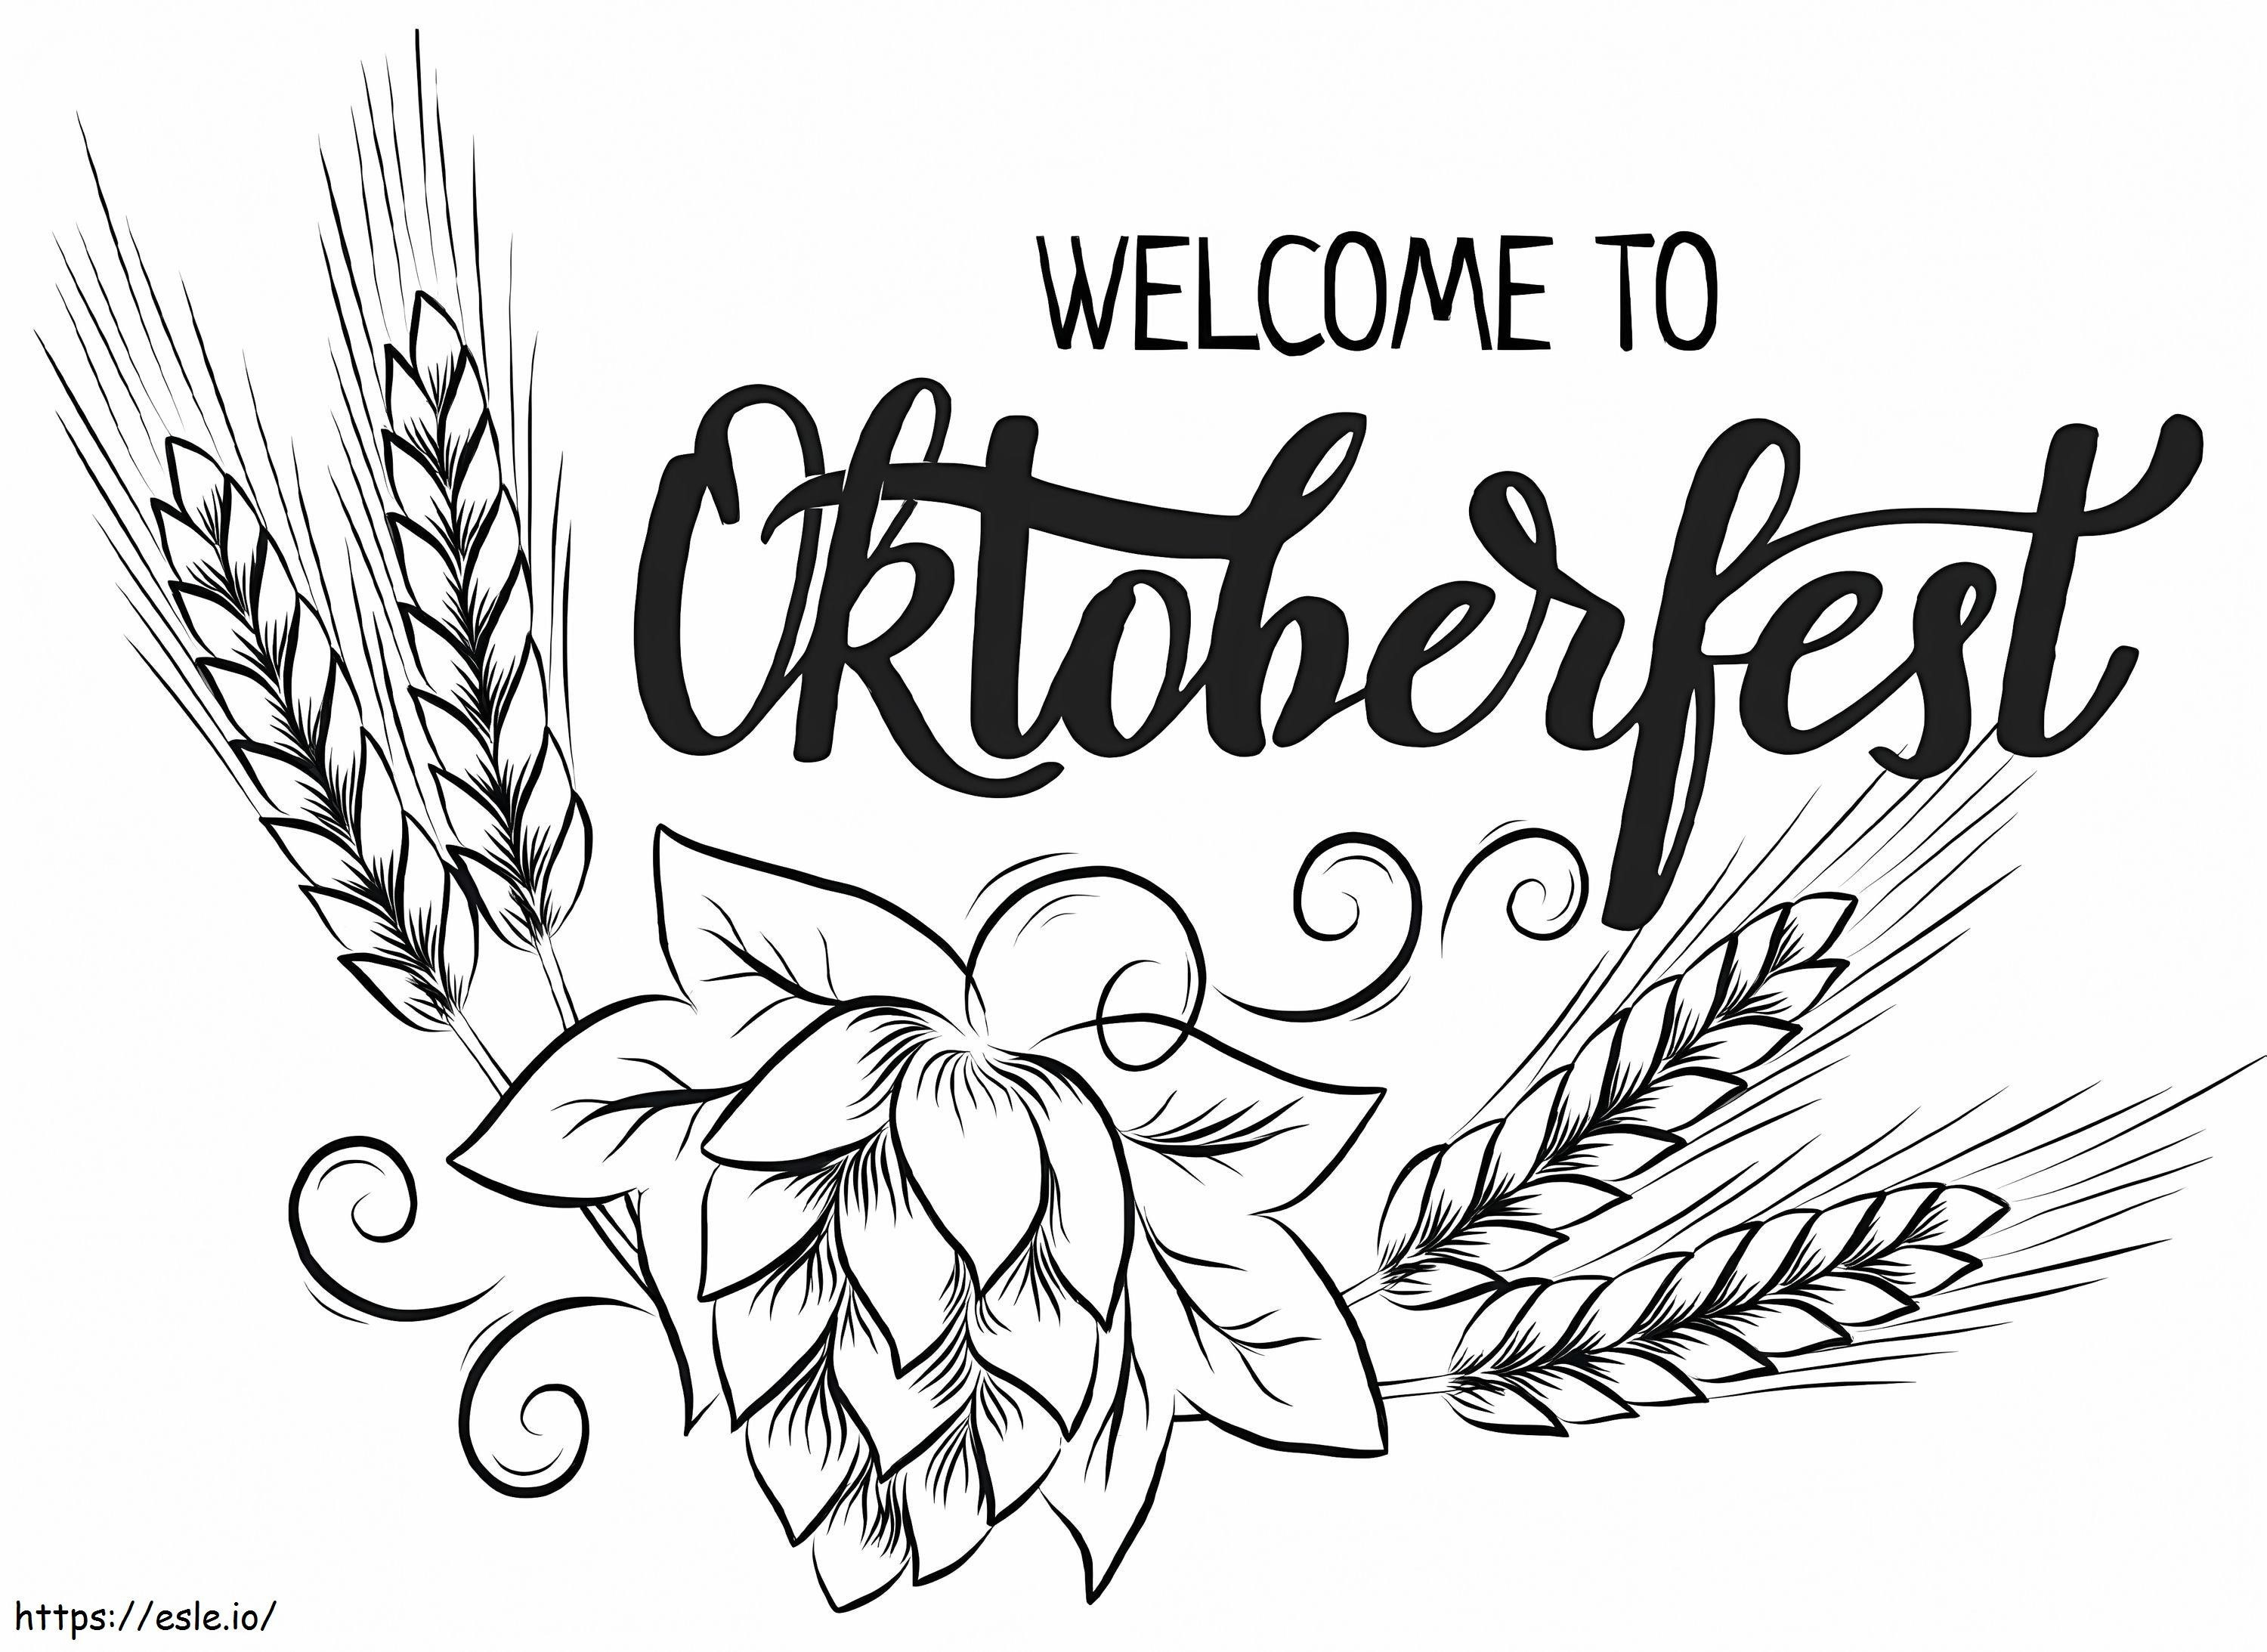 Welcome To The Oktoberfest coloring page